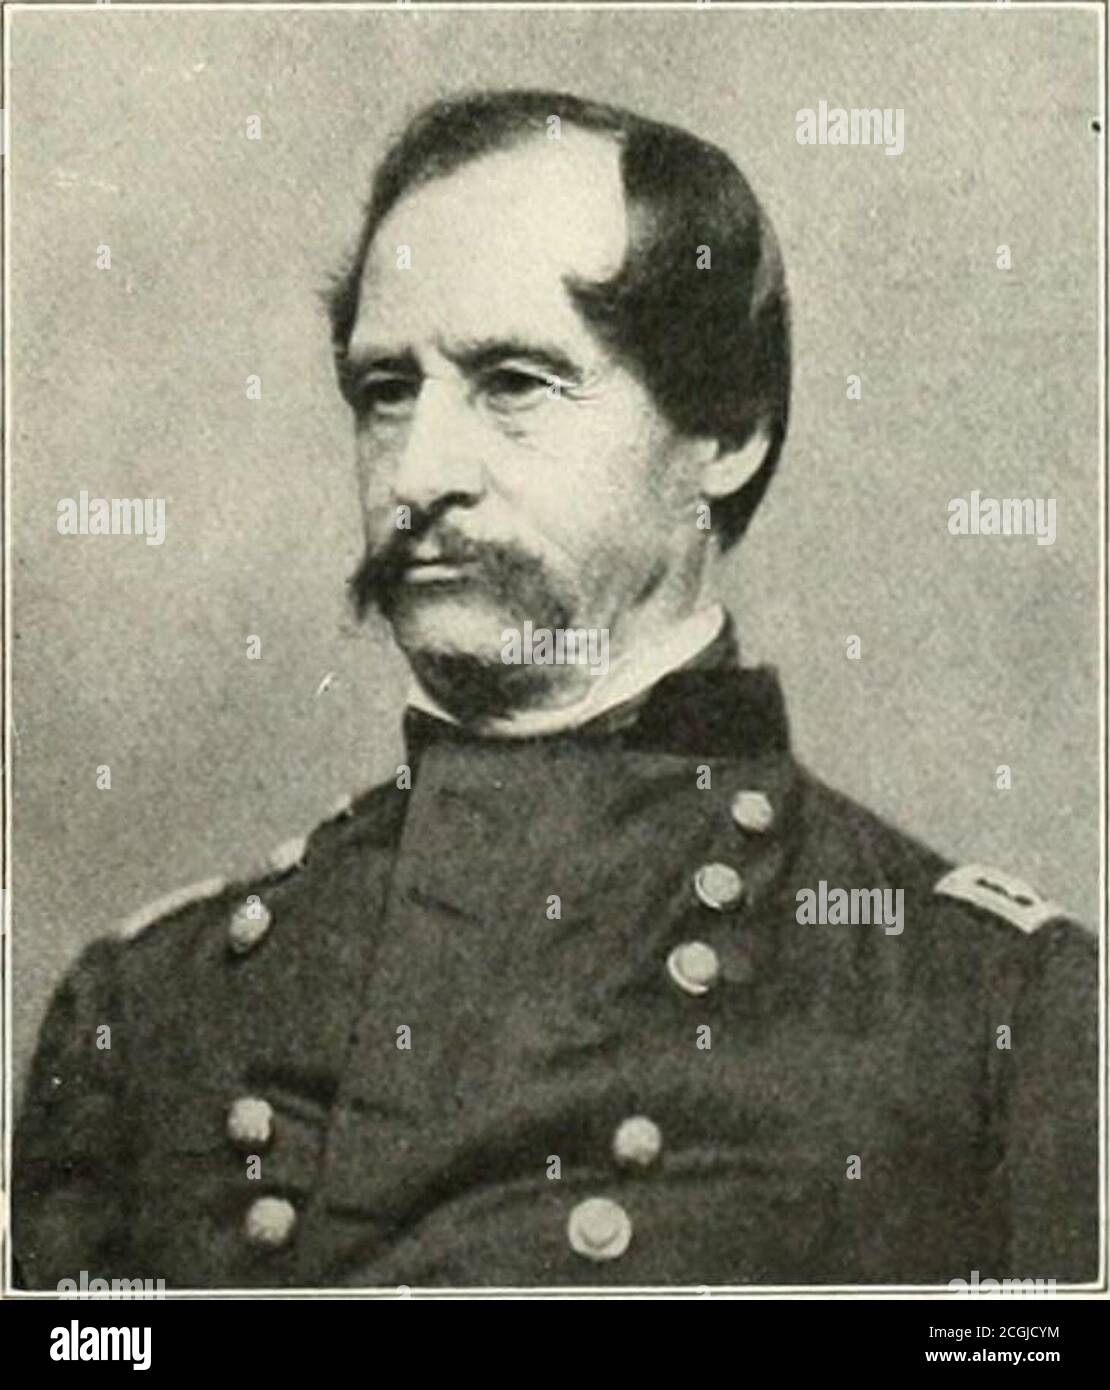 . The photographic history of the civil war.. . Benjamin Franklin Butler, Com- Gordon Granger, Commander of the Aimymander of the Department and of Kentucky in 18(i2; Noted at Army of the Gulf in 1862, and Chiekamauga. of the Army of the Jamesin 1804. With this Armyhe Operated Against Rich-mond in May and June. OPERATING ON THE GULF AND ALONG THE WESTERN FRONTIER James G. Blunt. Commander in Kansas and of the Army of the Frontier; at Prairie drove.. David Hunter, Head of a Division at Bui Run and later of the Department of the South. Armu of tlip S&gt;mrtljmcBt at Cedar Mountain, on August 9th Stock Photo